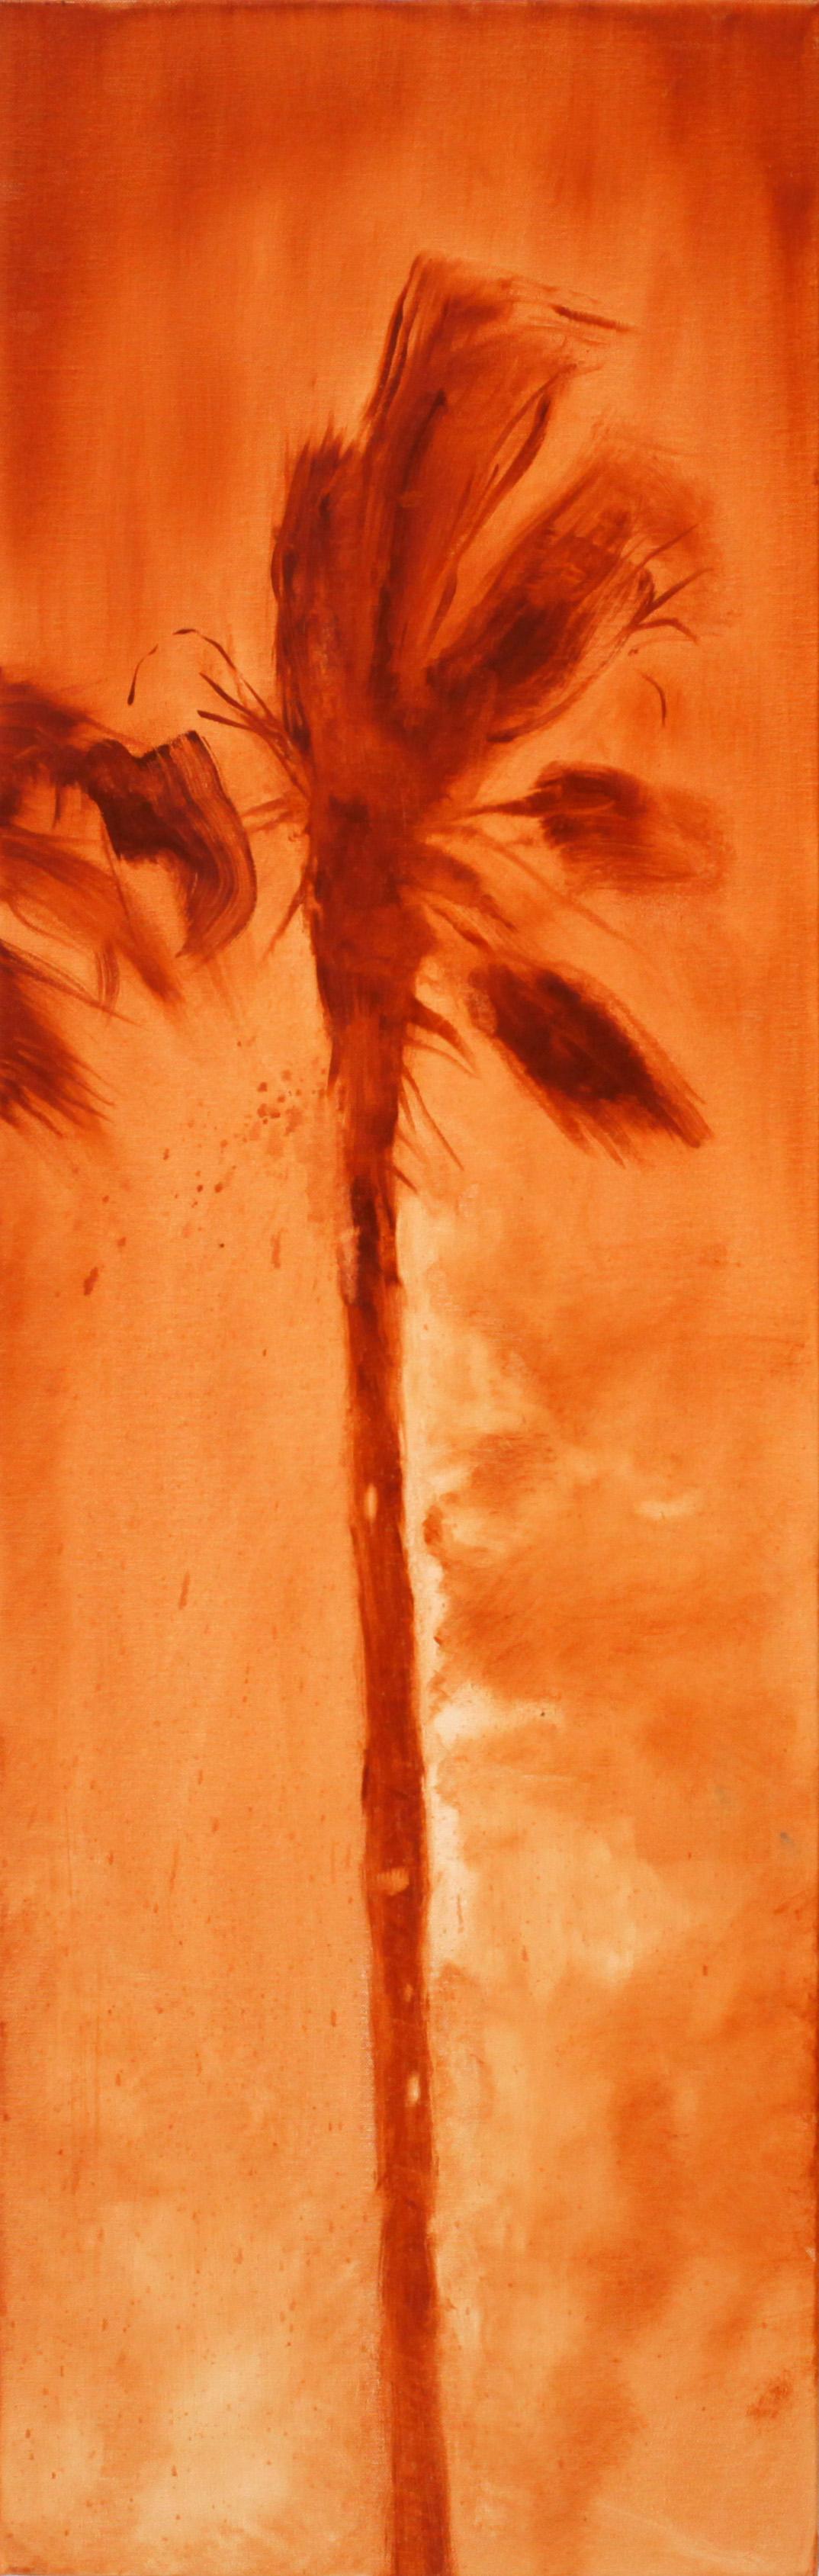 Perry Vàsquez Landscape Painting - Conceptual Realistic Palm Tree Oil Painting, "Inferno 6"